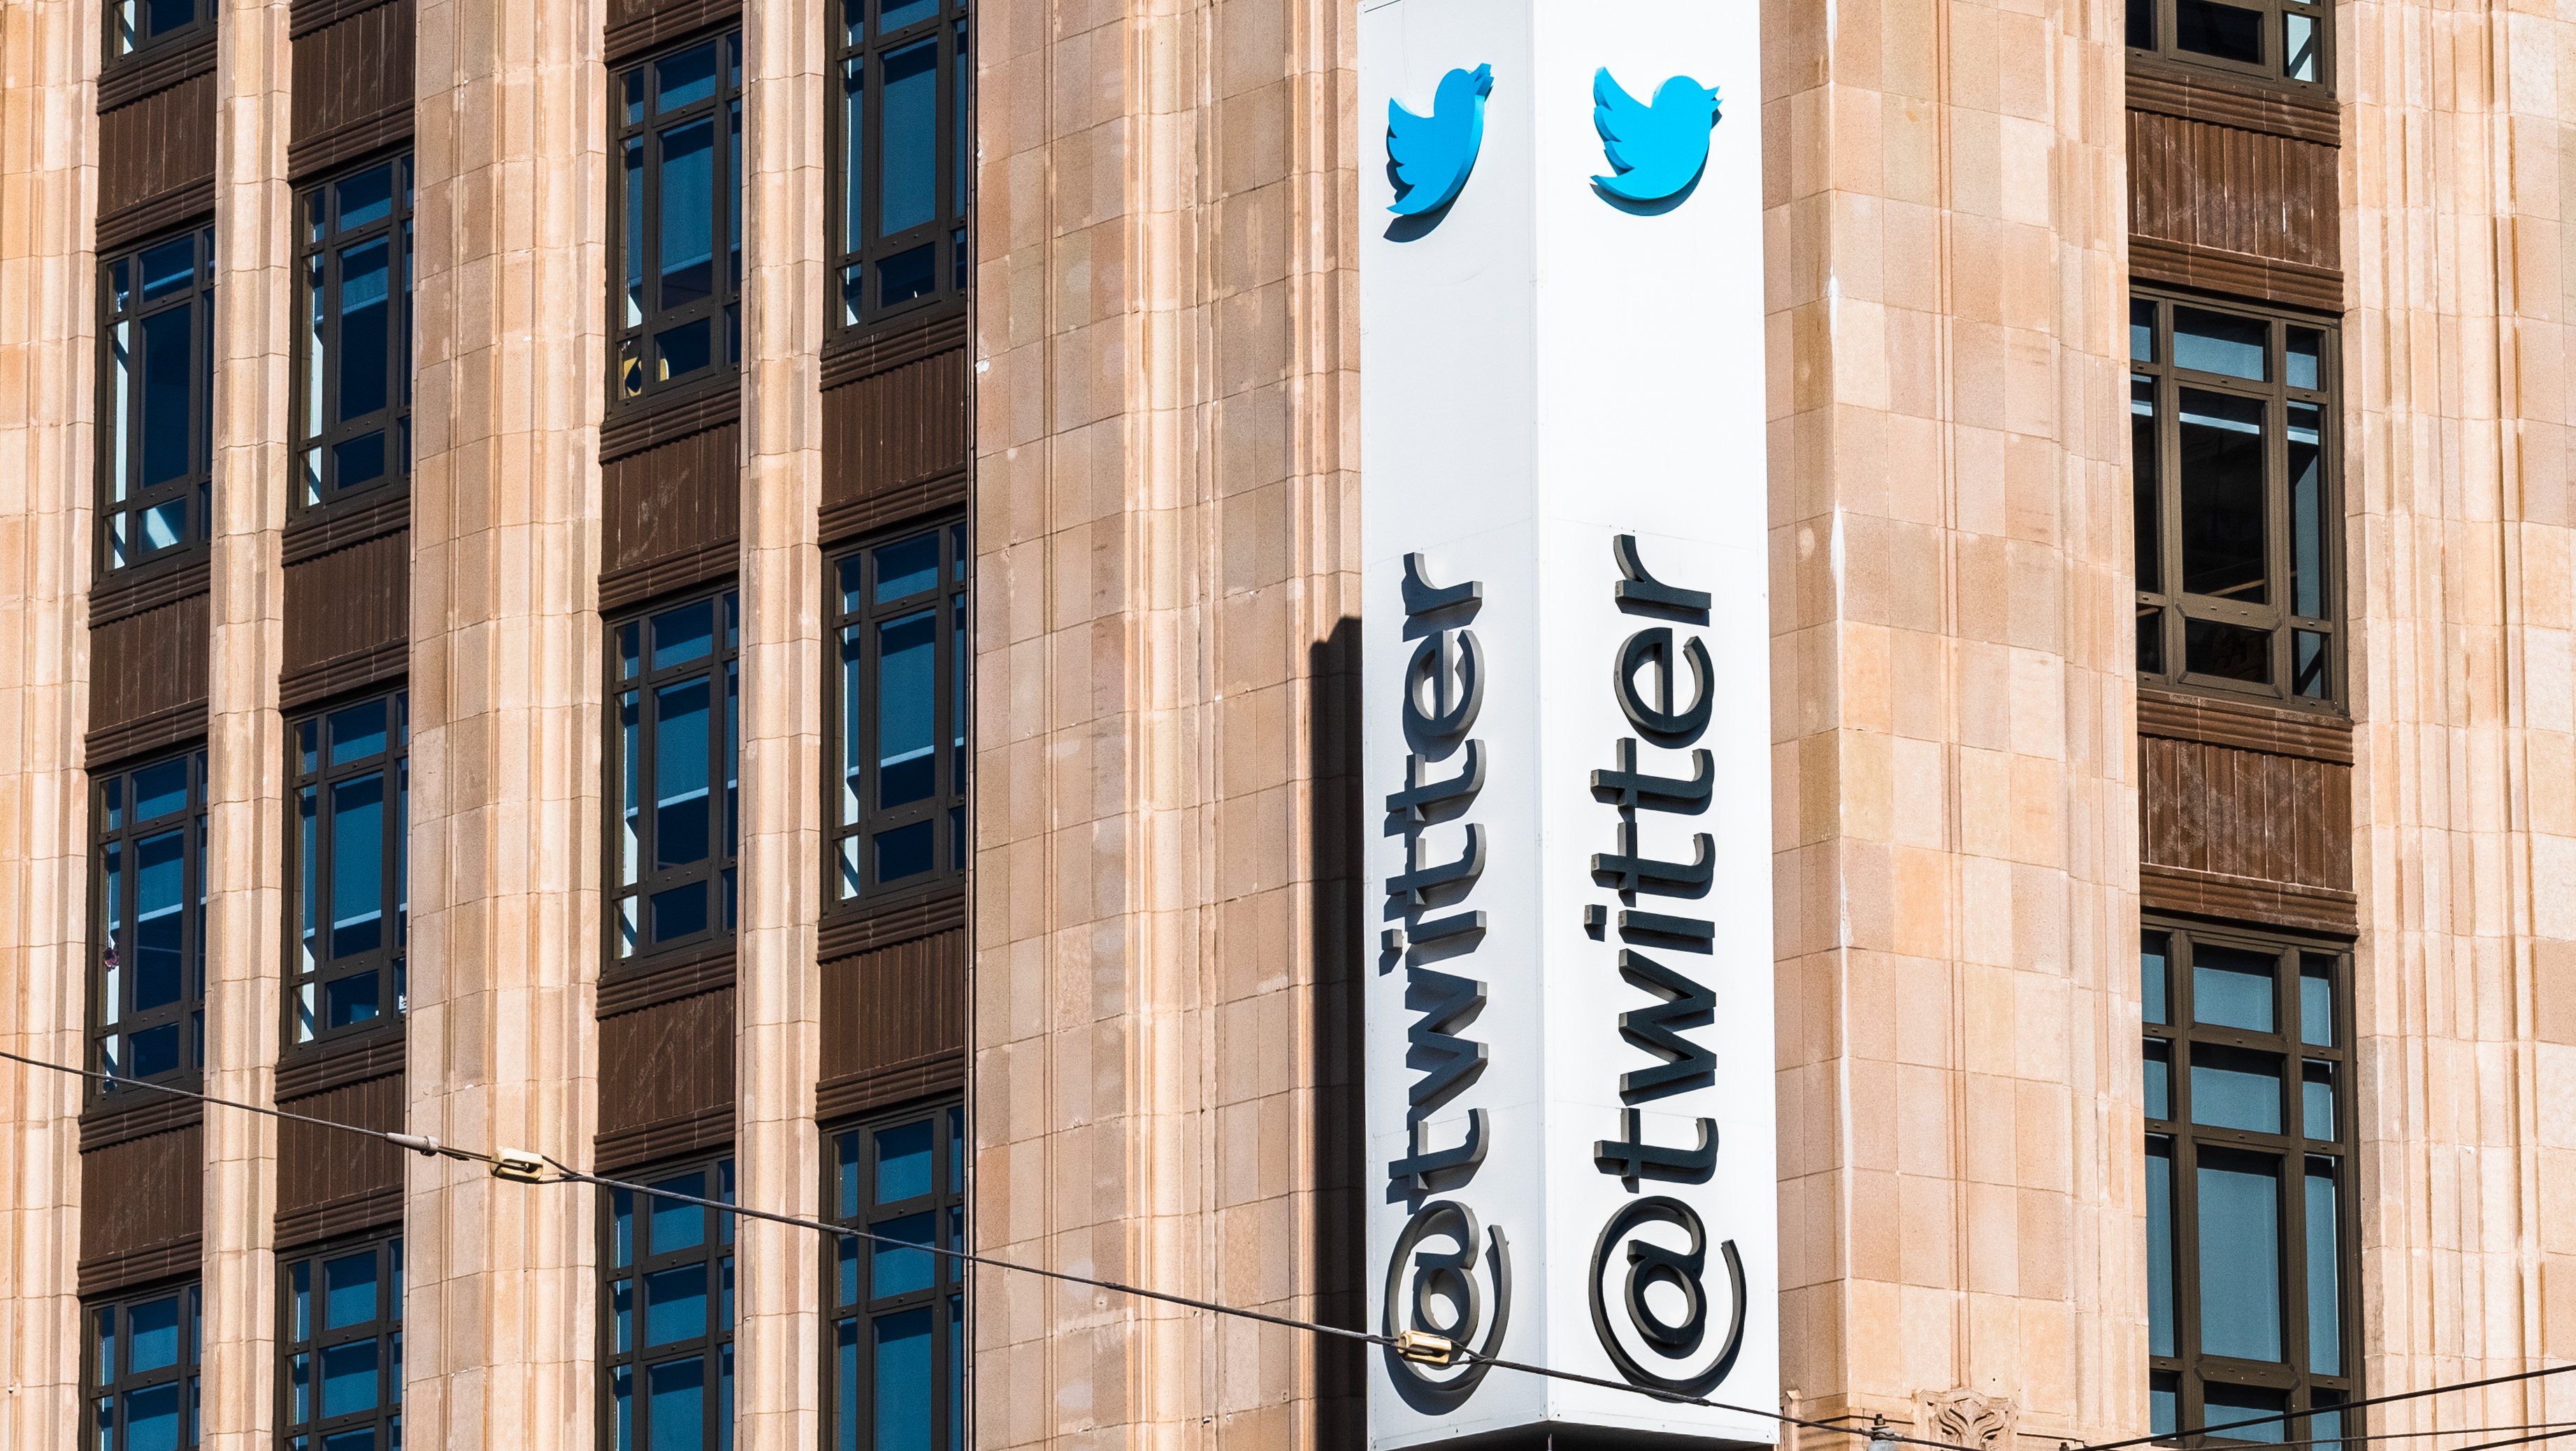 Twitter headquarters in downtown San Francisco